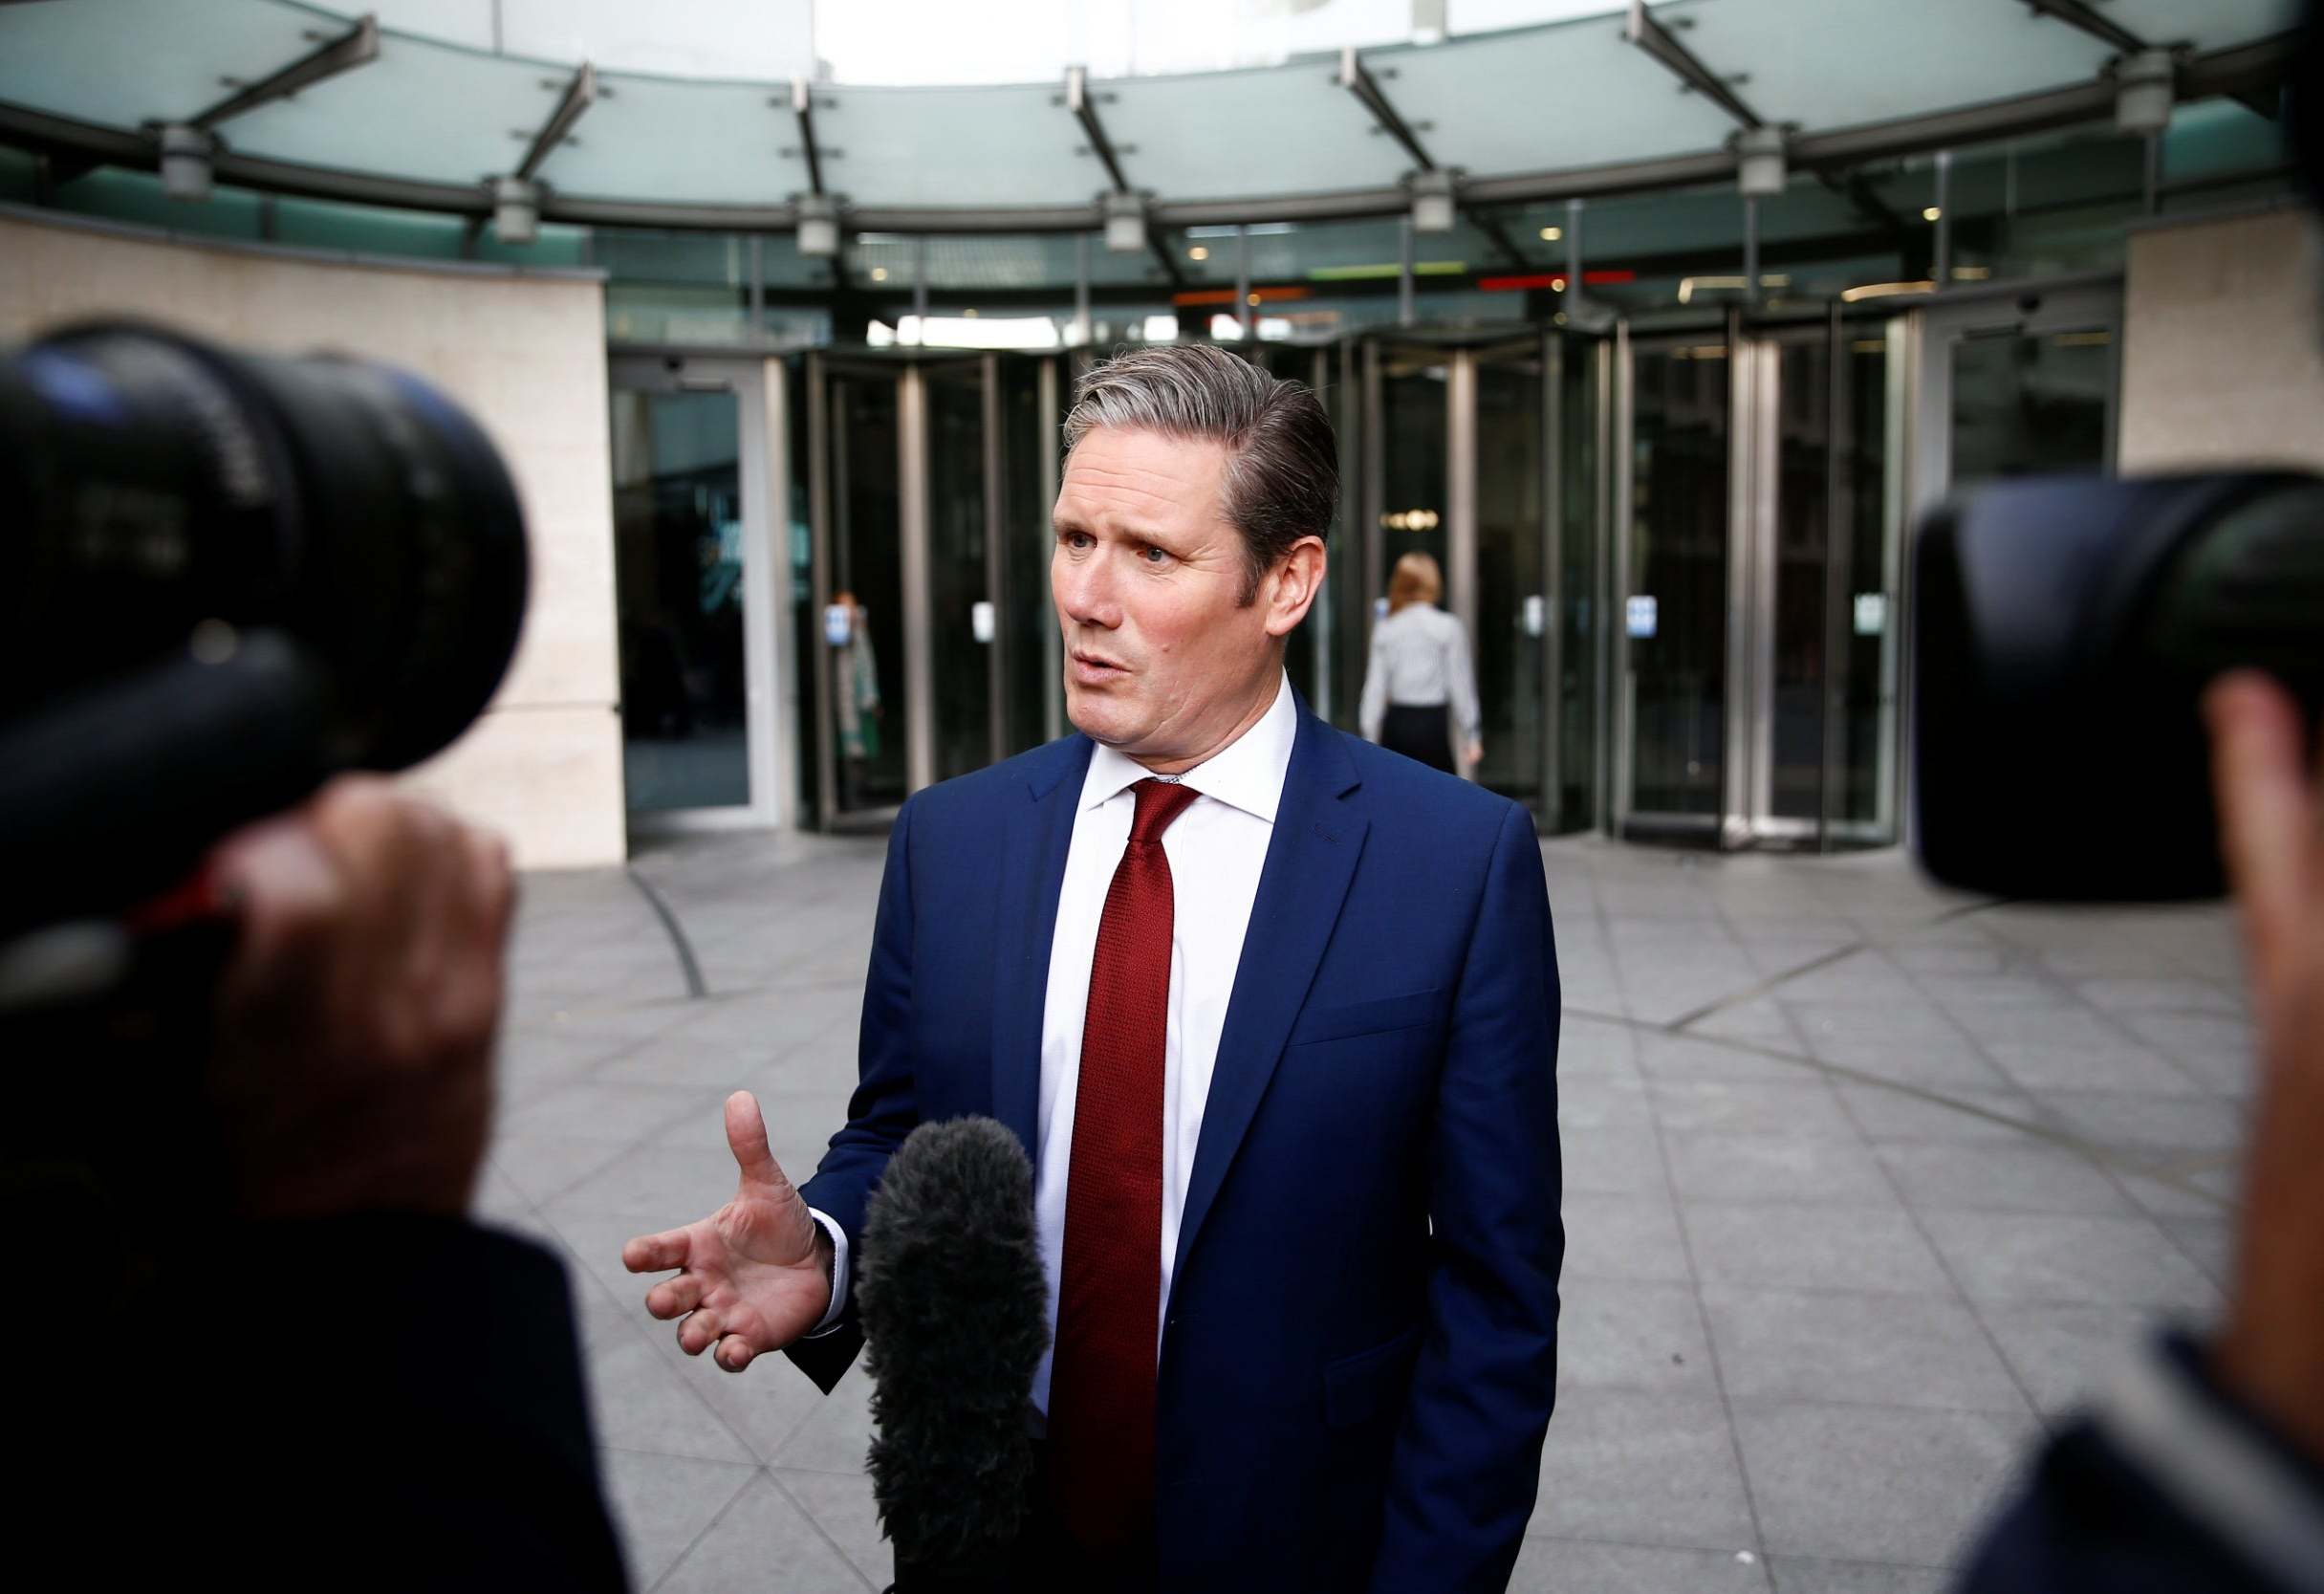 Keir Starmer has to focus on the big issues